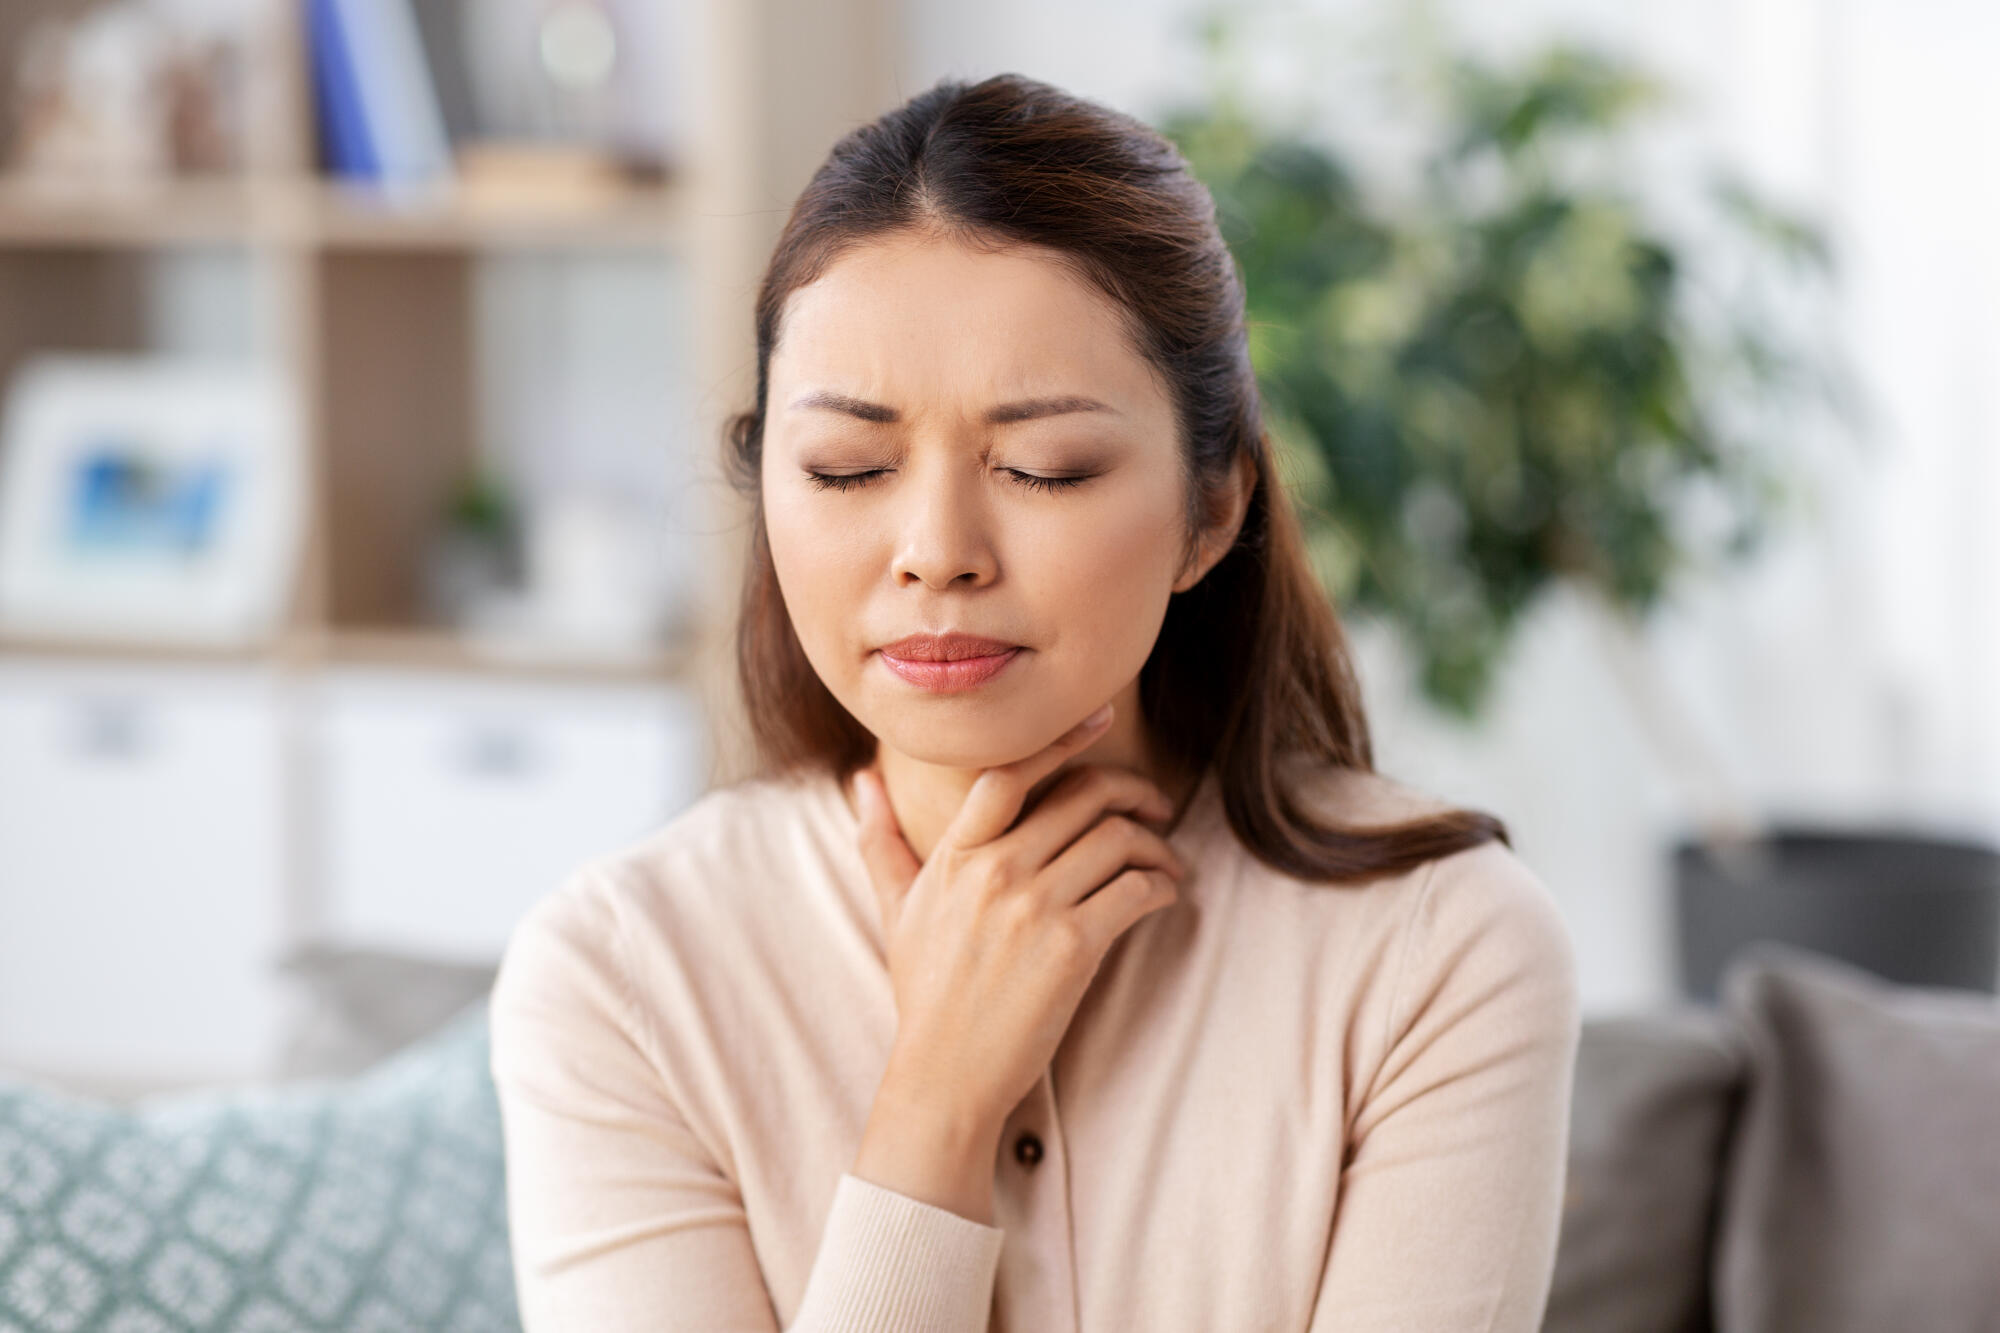 what are the early warning signs of thyroid problems?